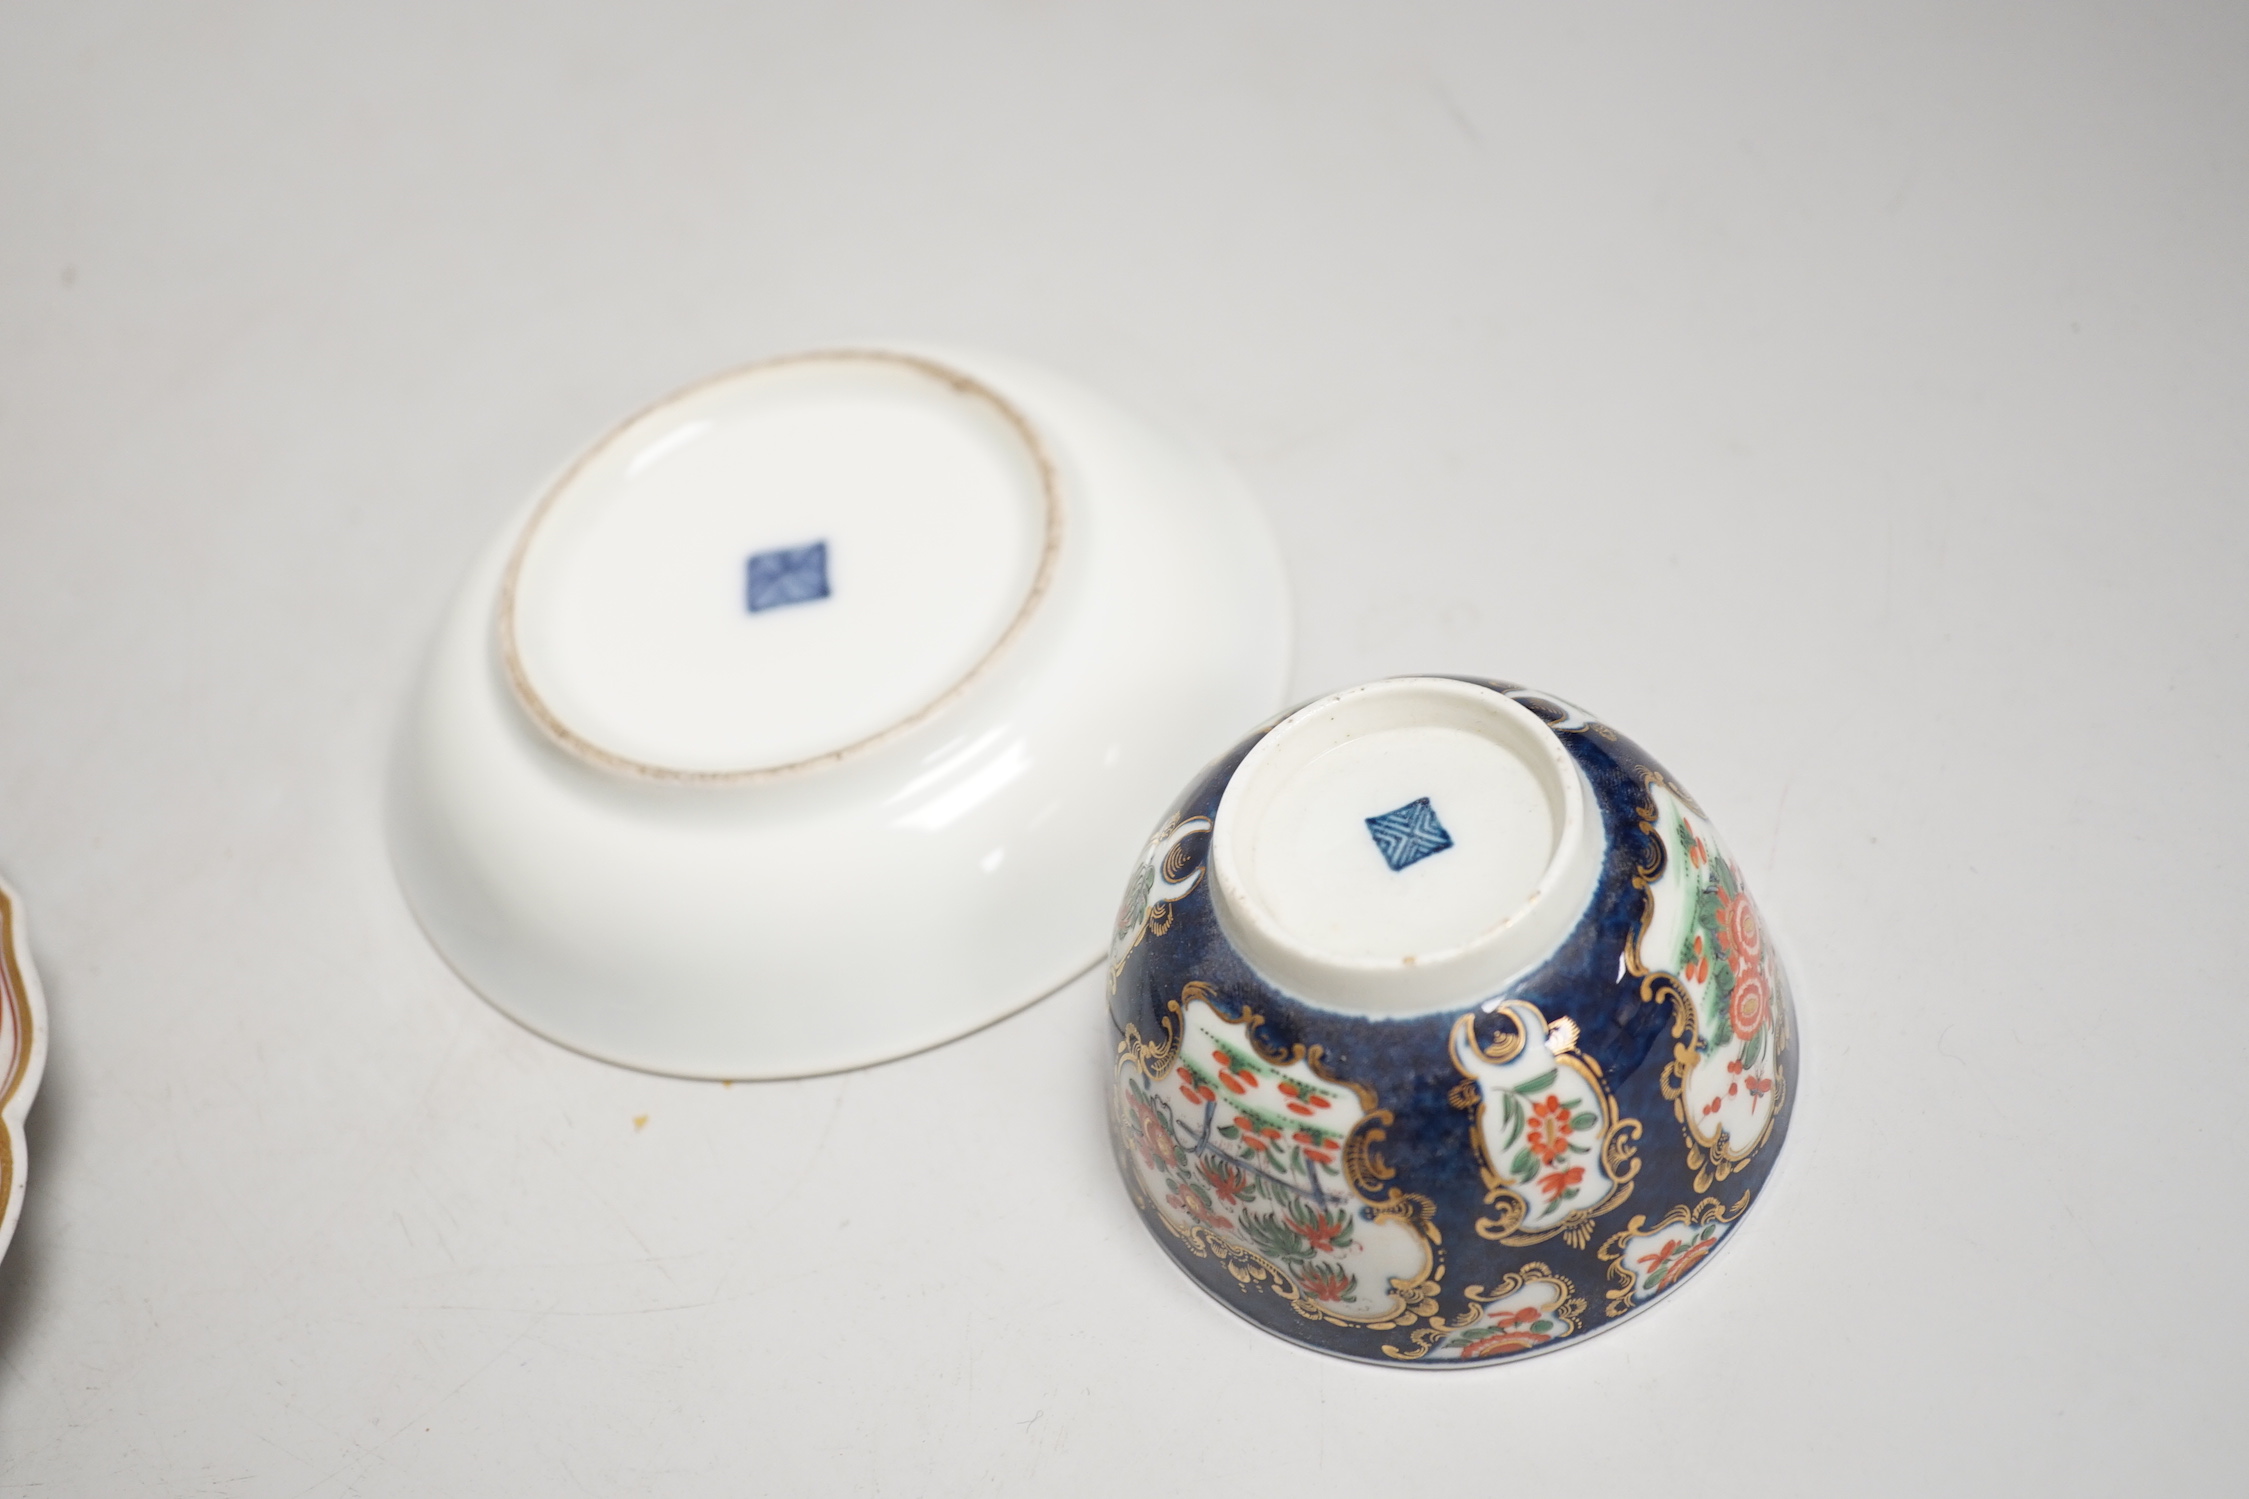 A Worcester kakiemon style scale blue trio, c.1770, a Worcester Queen Charlotte’s pattern plate, 19.5 cm and a Samson saucer in Worcester style